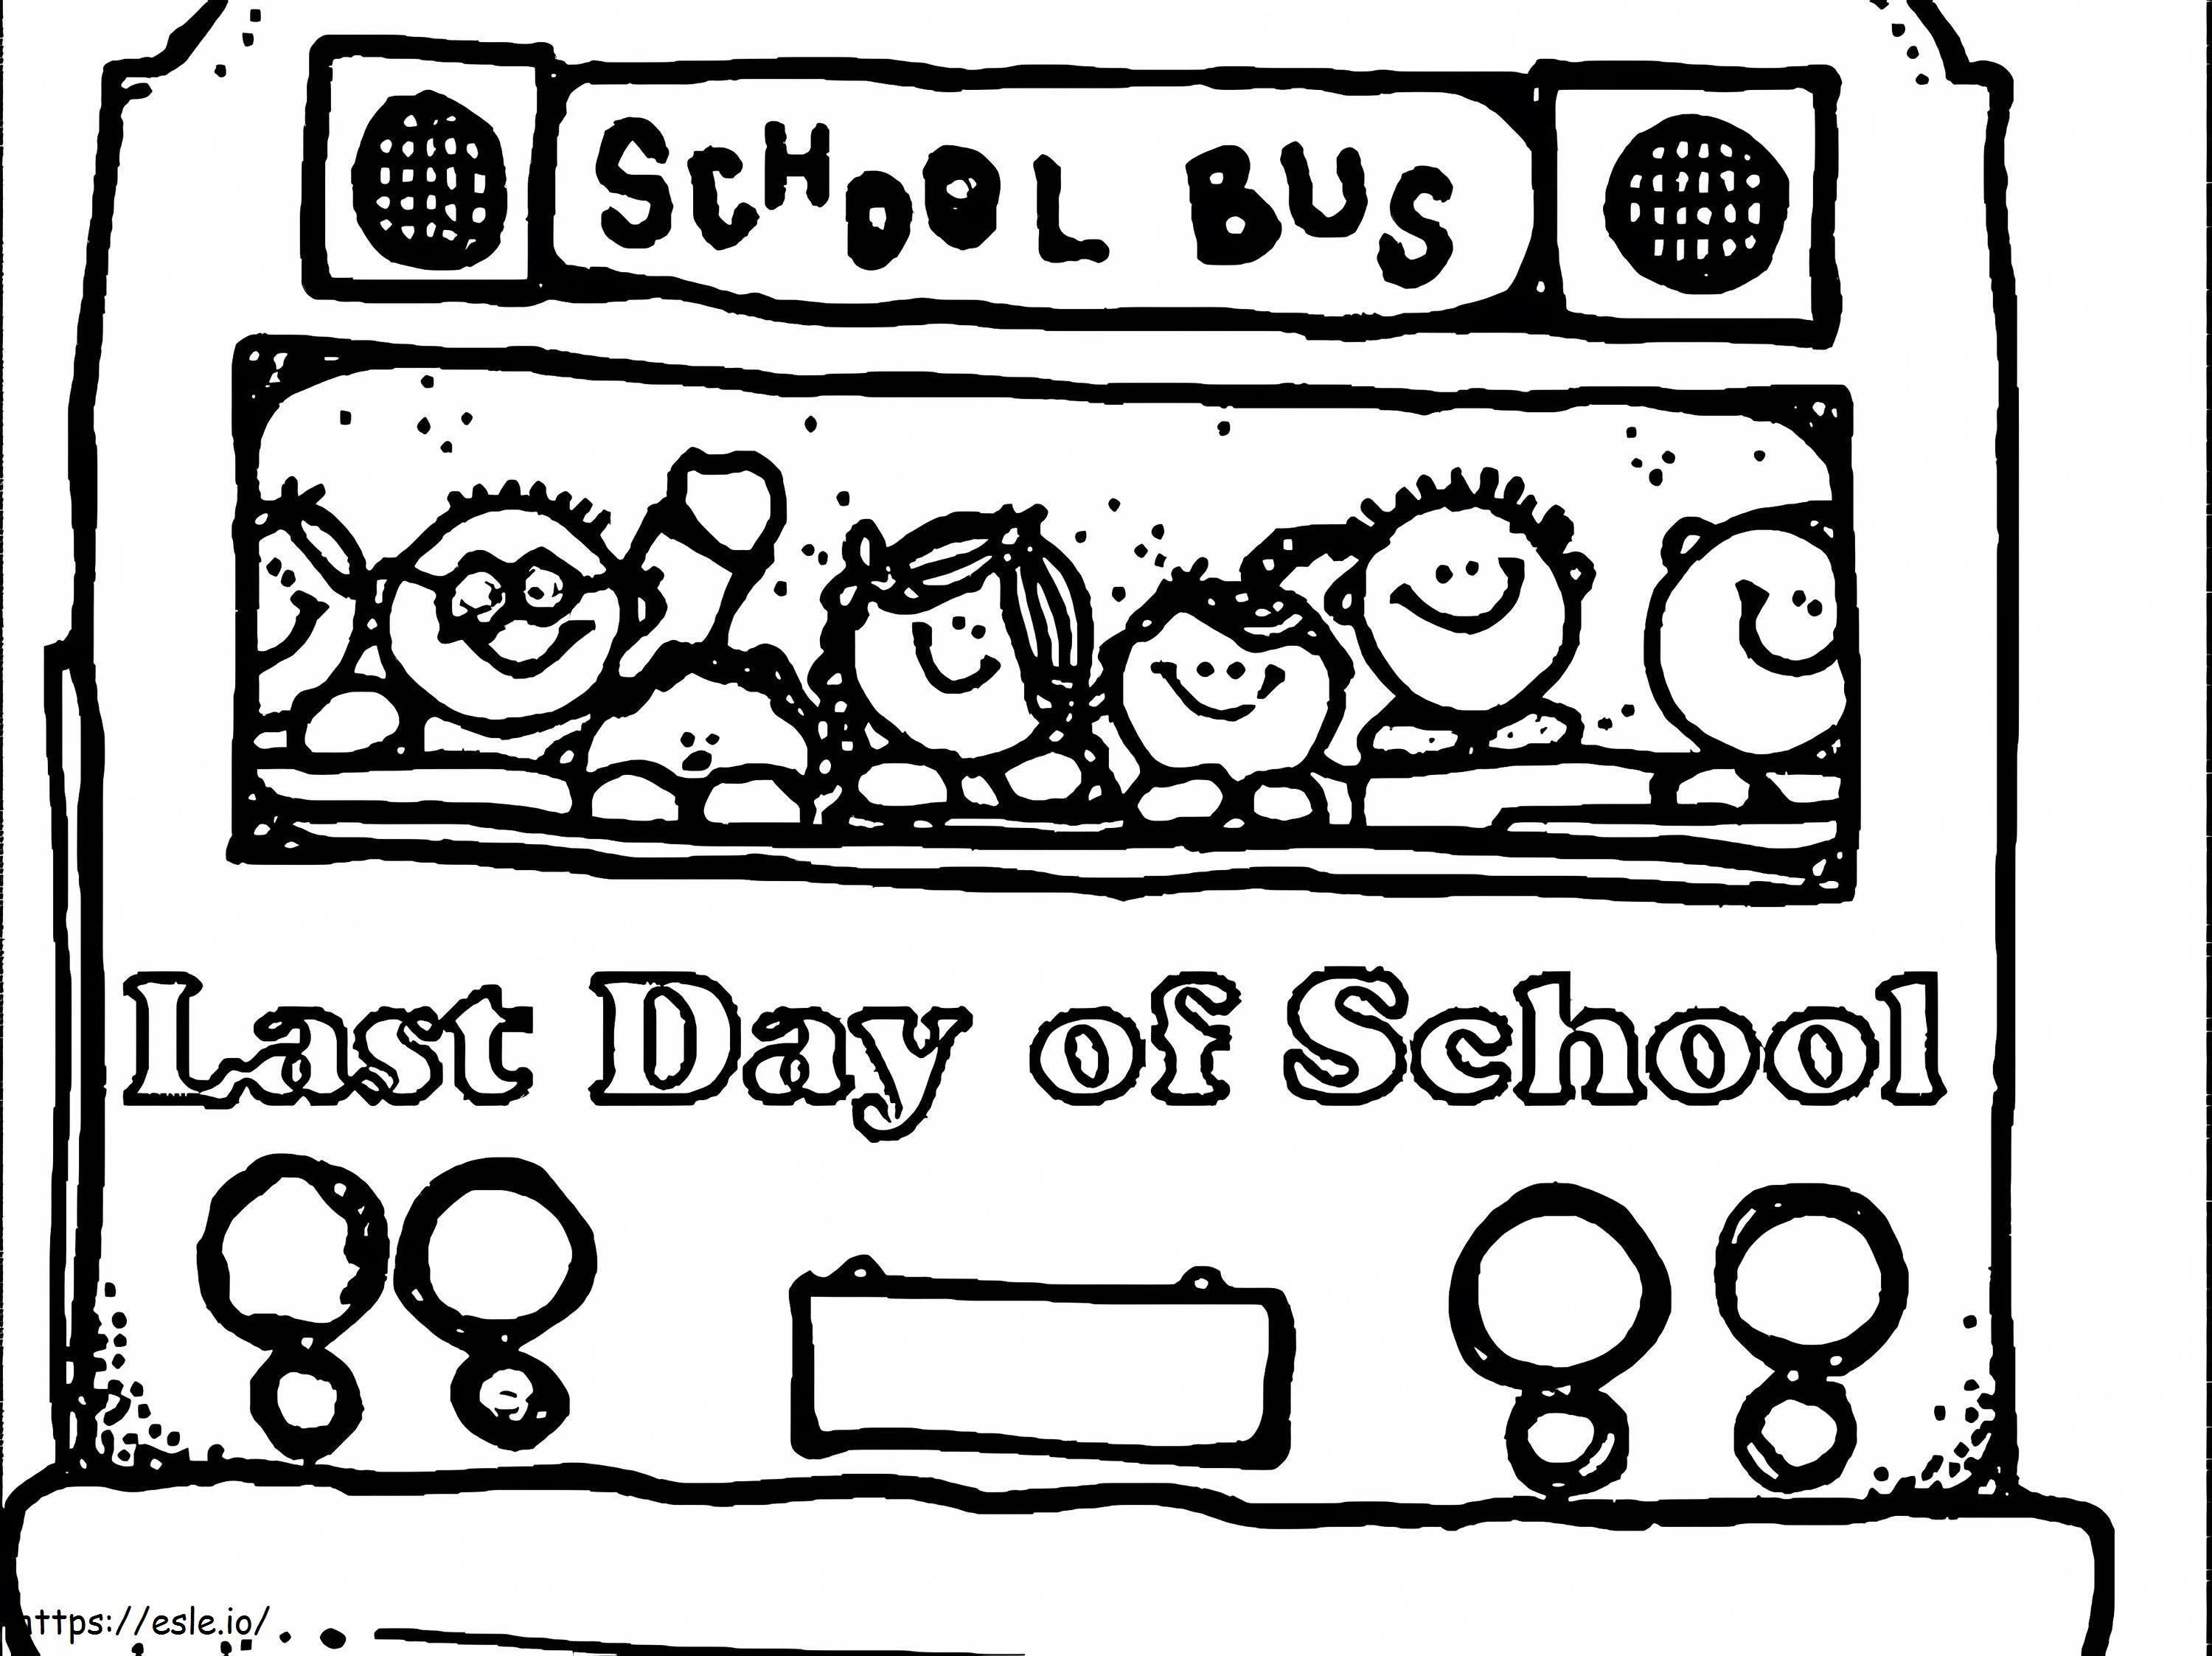 Printable Last Day Of School coloring page